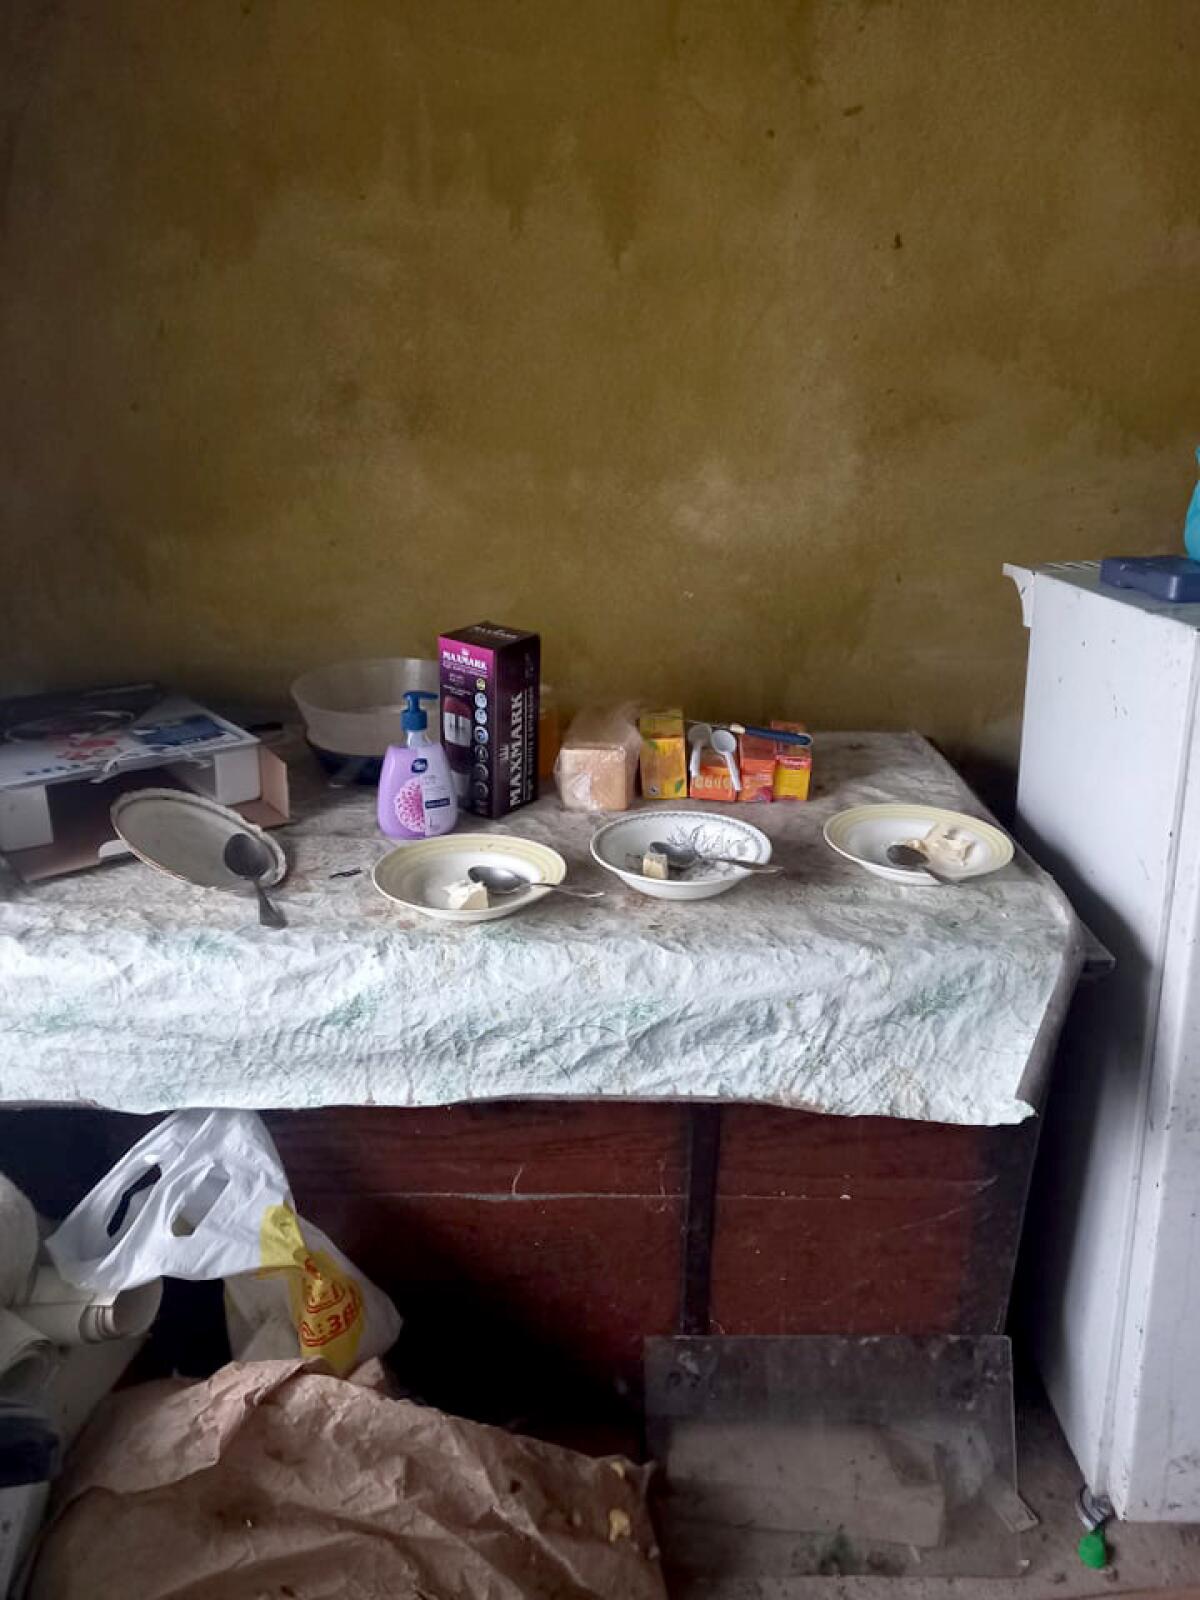 A makeshift table holds three bowls of food for Tatyana, her daughter and her boyfriend in the underground shelter.